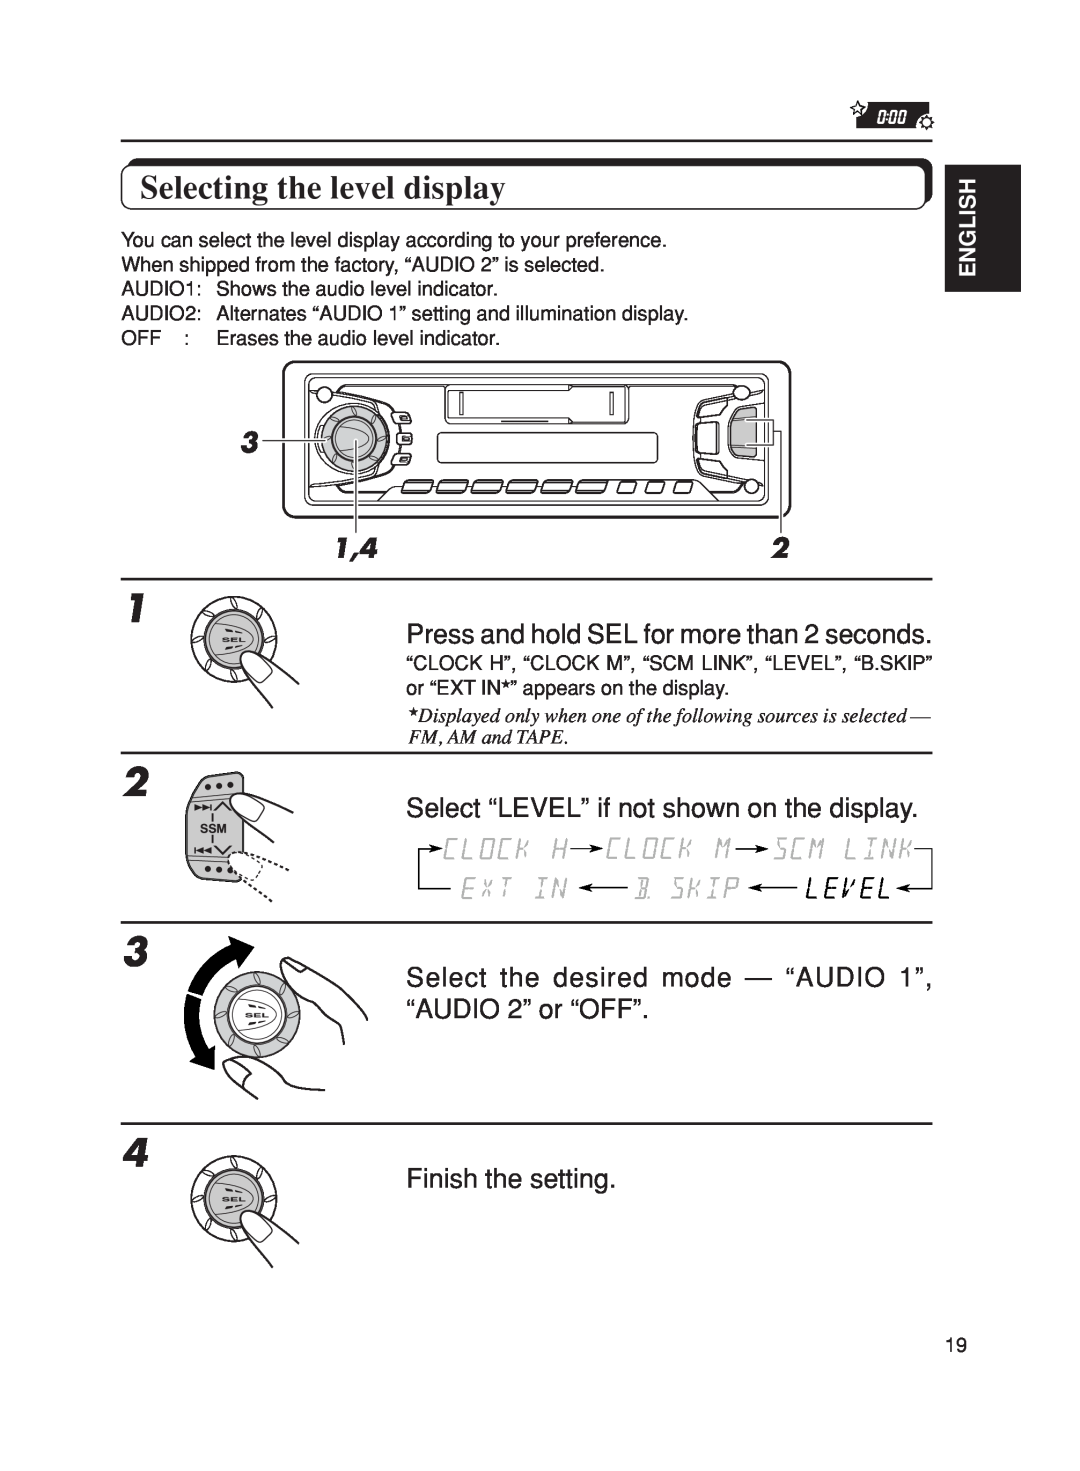 JVC KS-FX270 manual Selecting the level display, Select “LEVEL” if not shown on the display, Finish the setting, English 